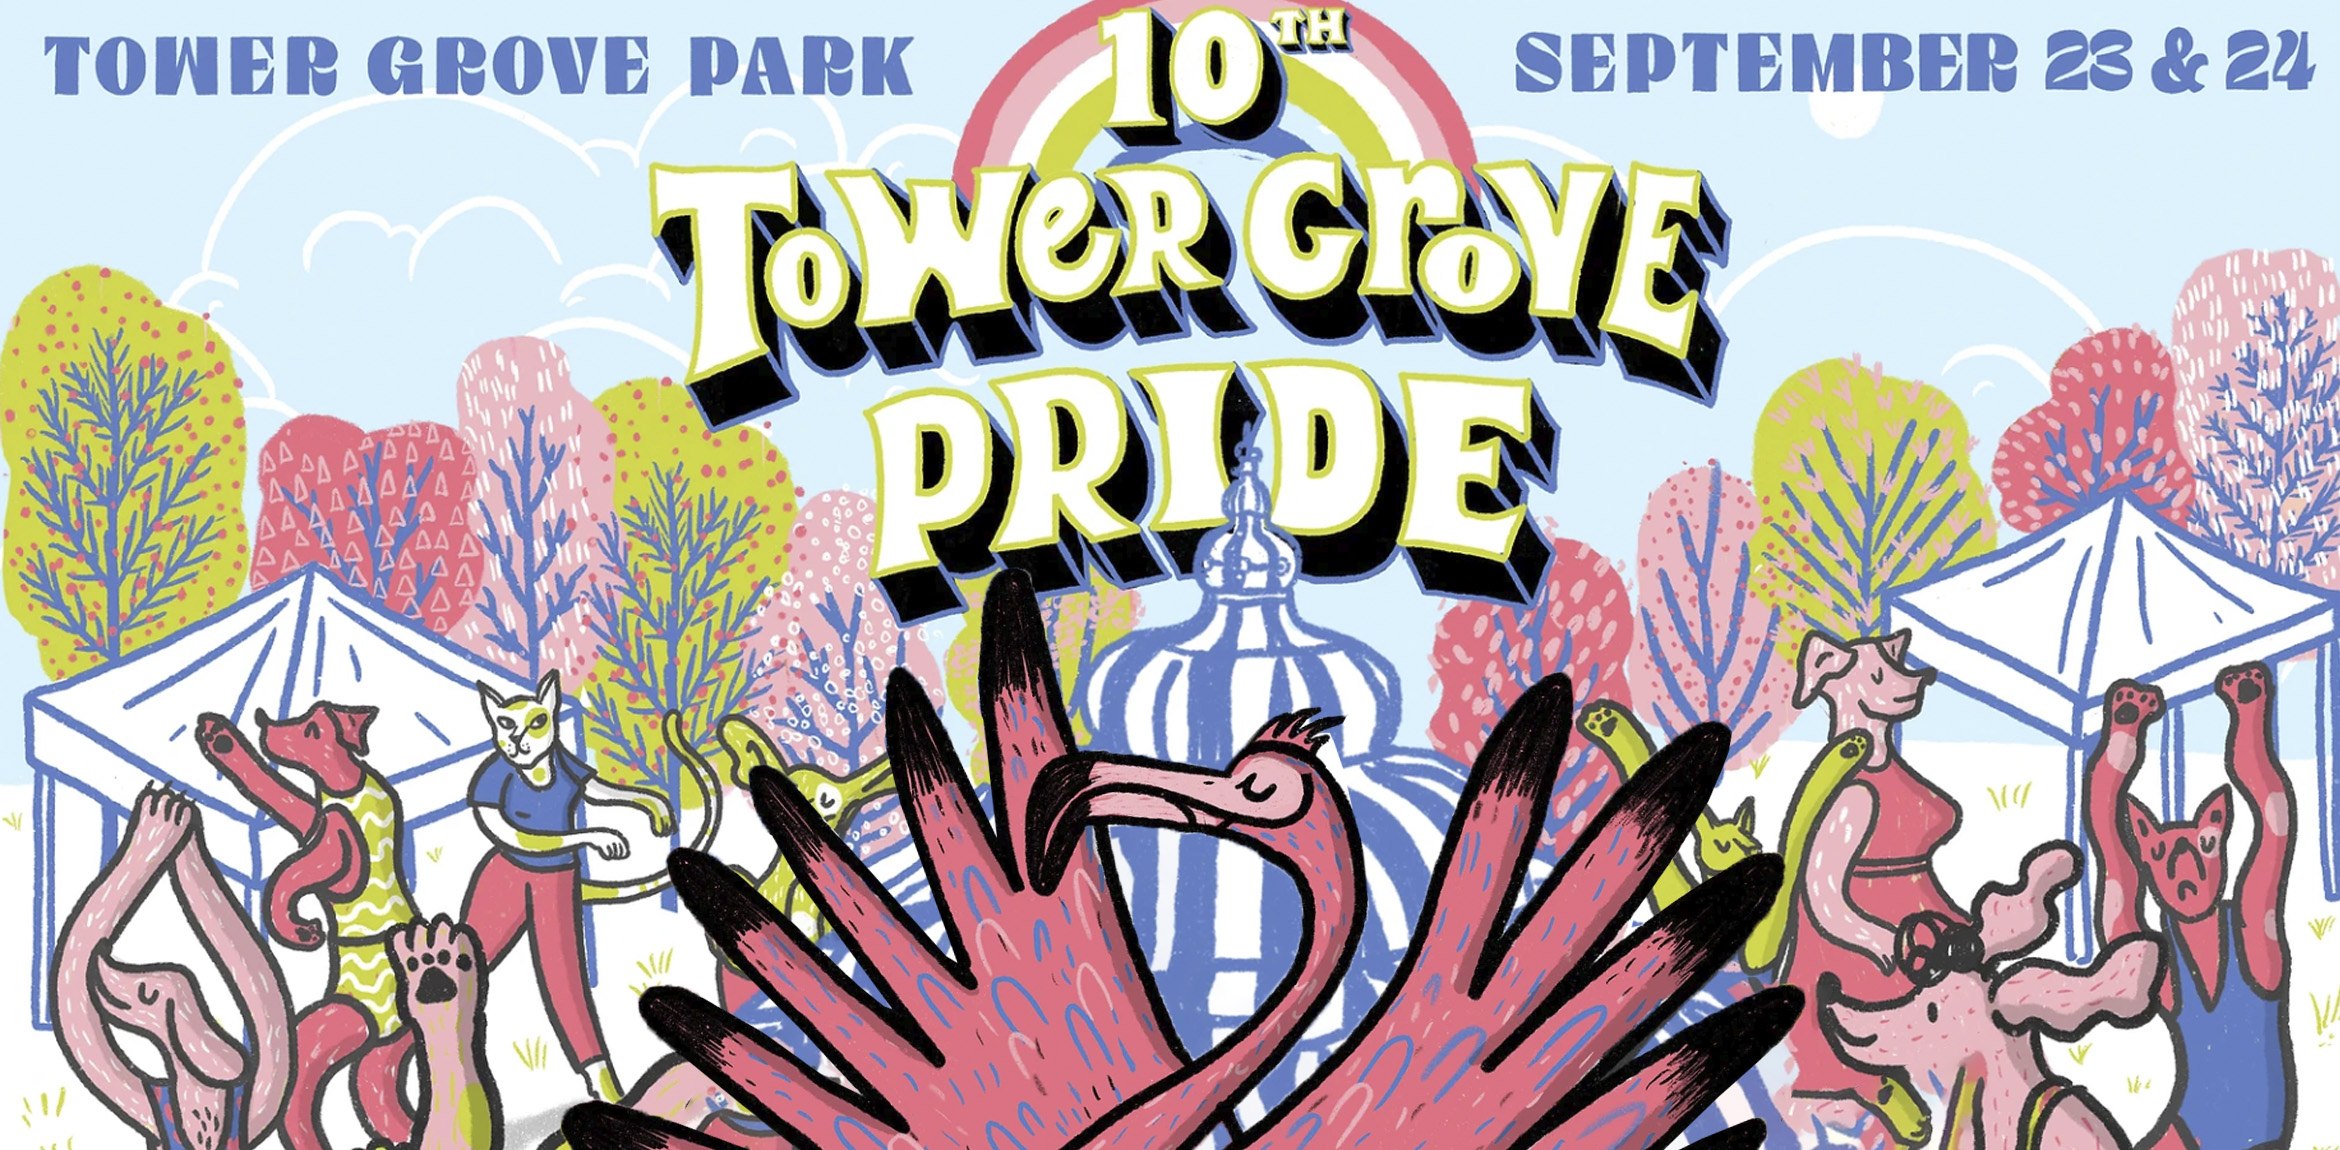 An illustrated poster with many anthropomorphic animals at a park with a large sign depicting text Tower Grove Pride